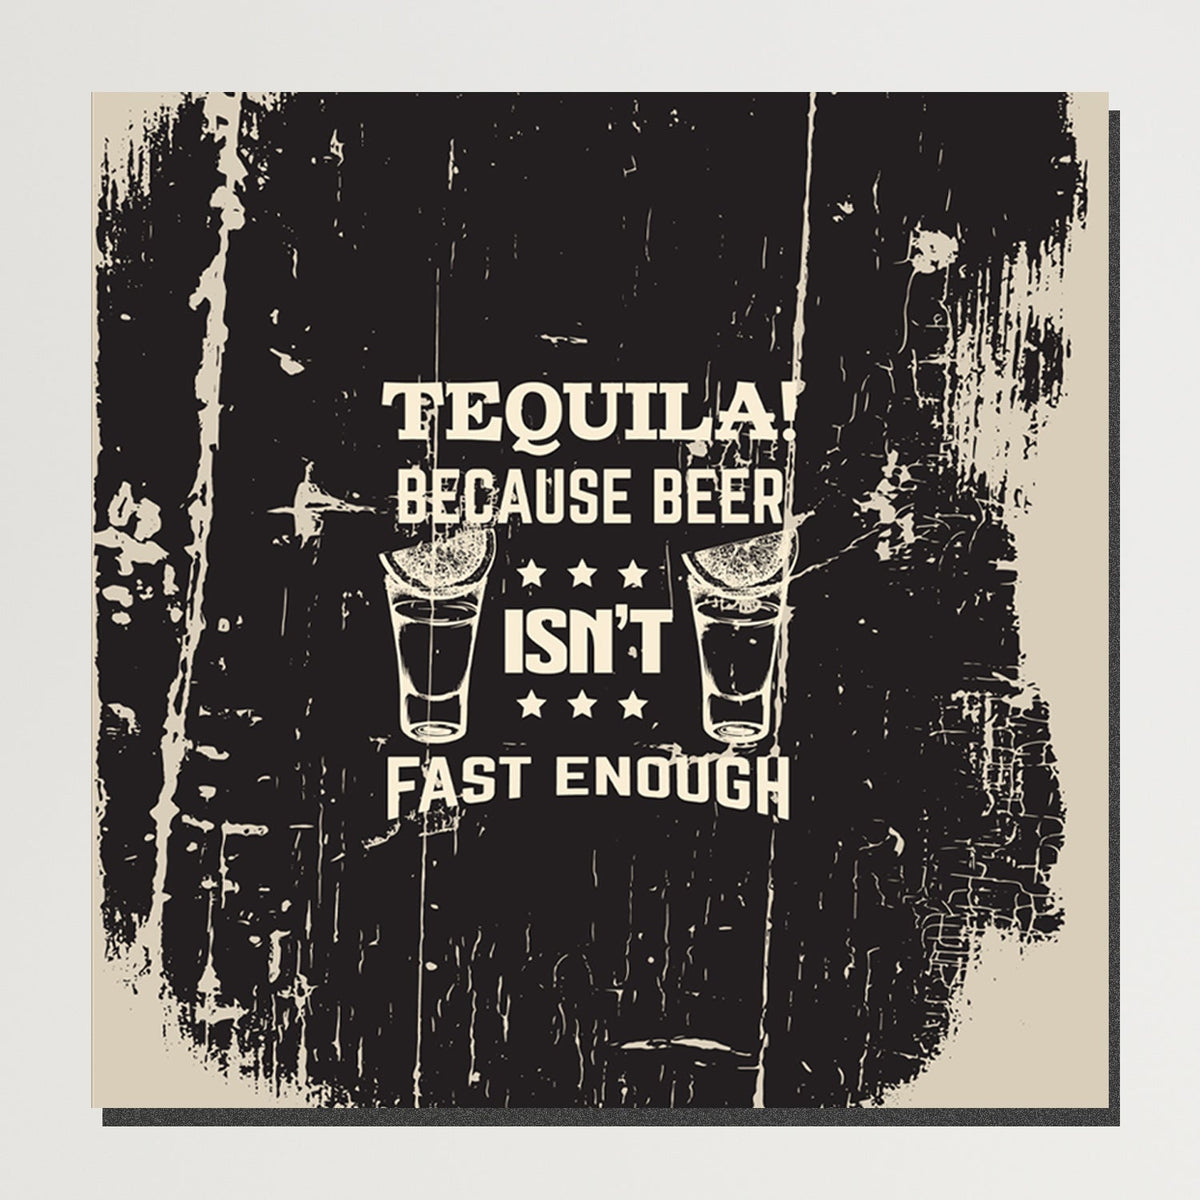 https://cdn.shopify.com/s/files/1/0387/9986/8044/products/TequilaBecauseCanvasArtprintStretched-plain.jpg